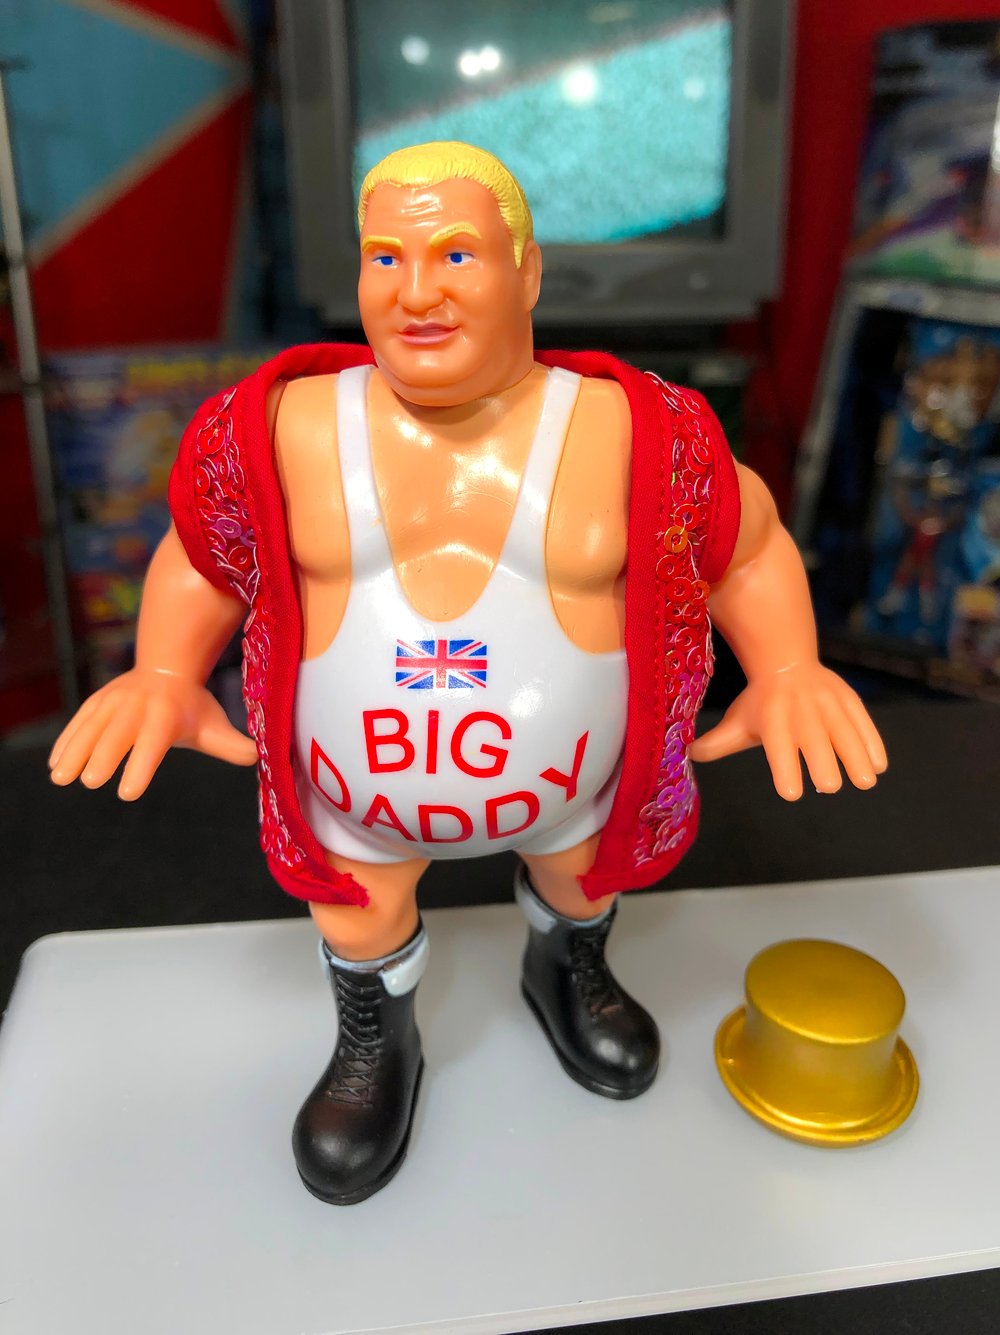 **NO PACKAGING**BIG DADDY Wrestling Megastars Series 2 Figure by CHELLA TOYS (Loose)